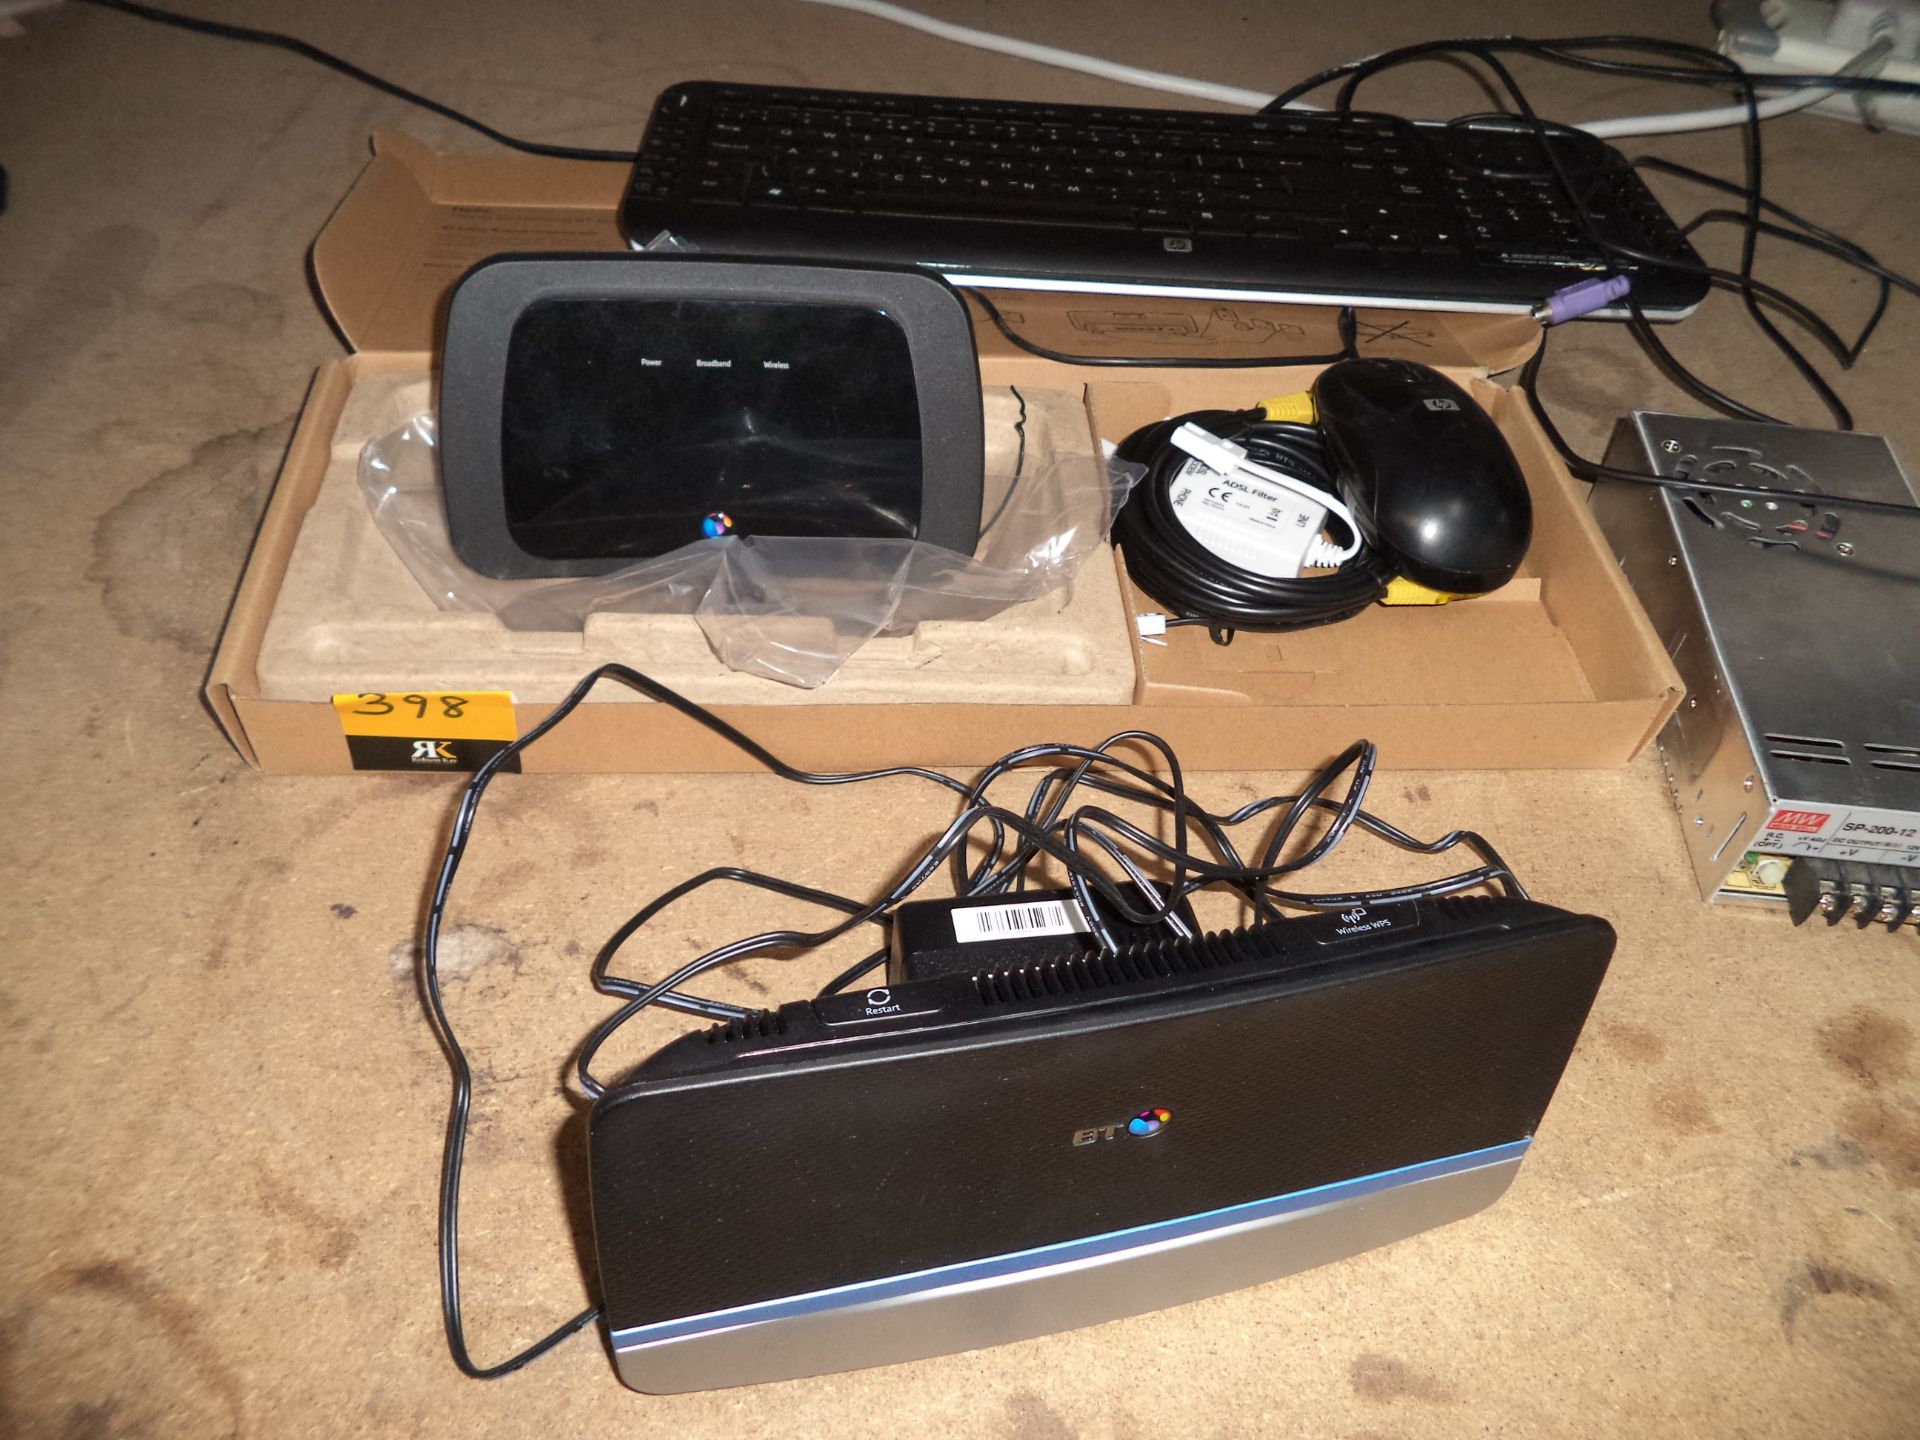 Assorted networking items comprising wireless equipment, keyboard, mouse, power supply, etc - Image 2 of 3